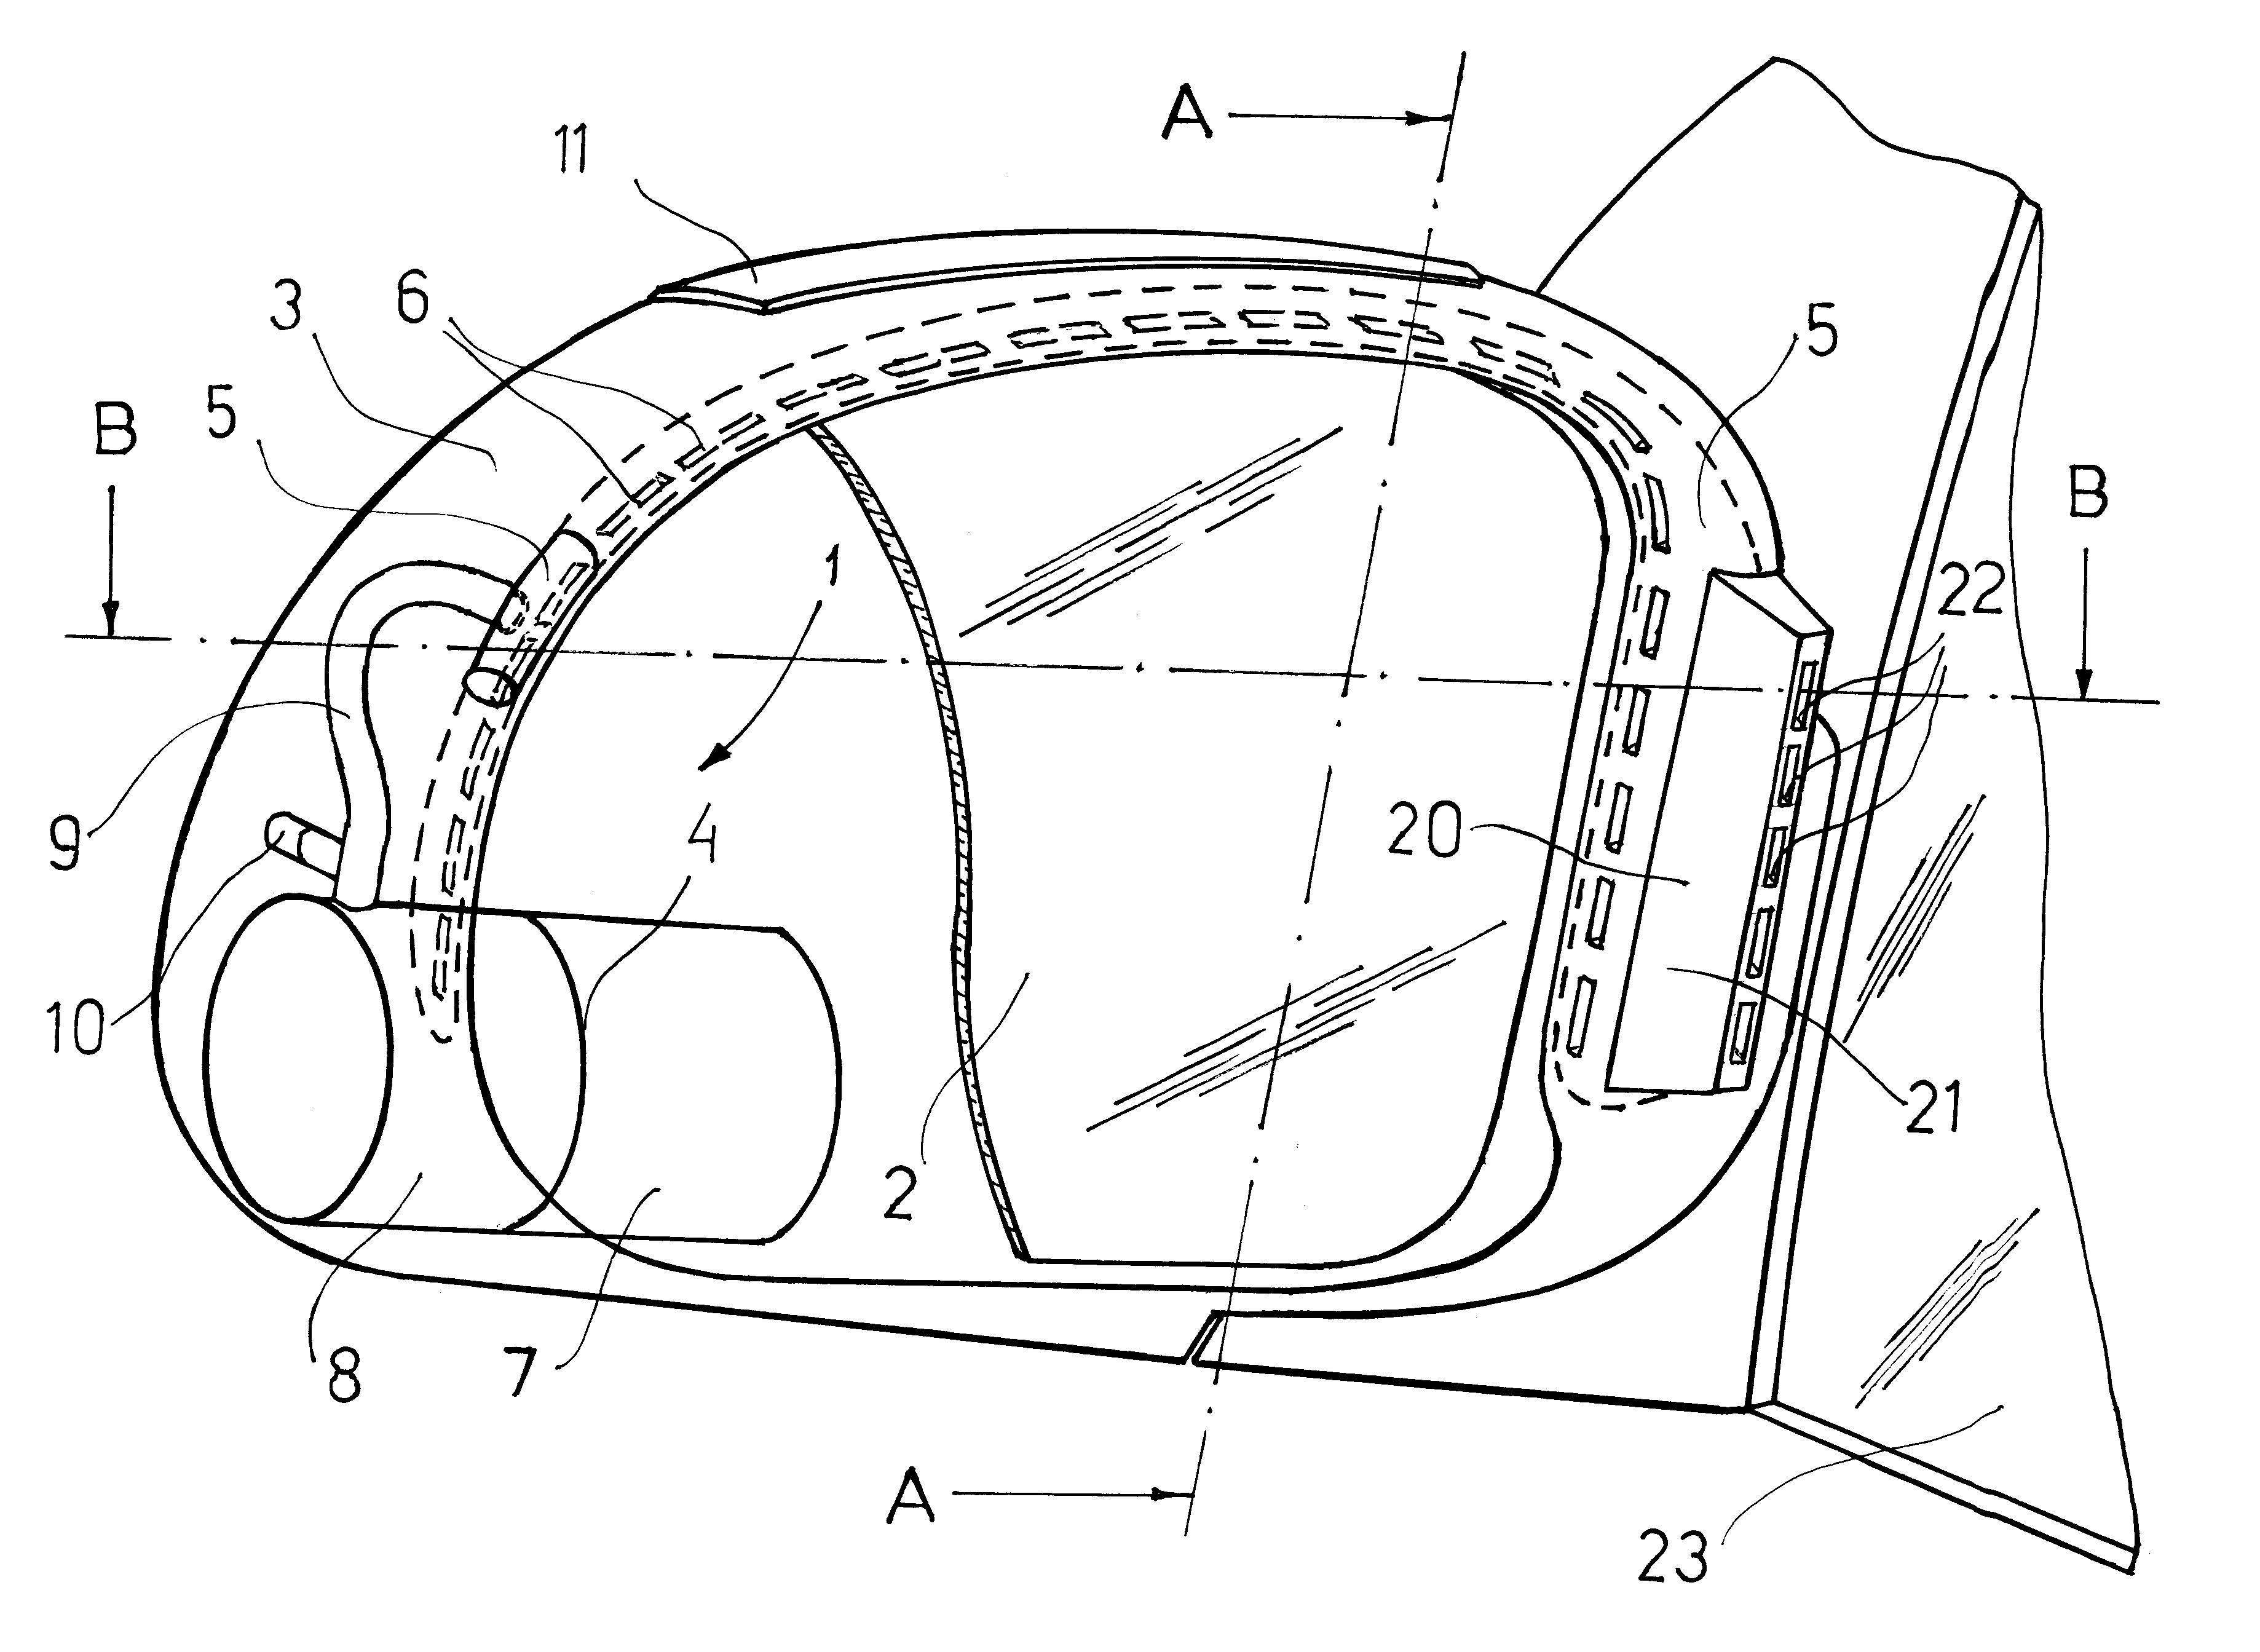 Universal clearing air system for windows and external mirrors of a vehicle